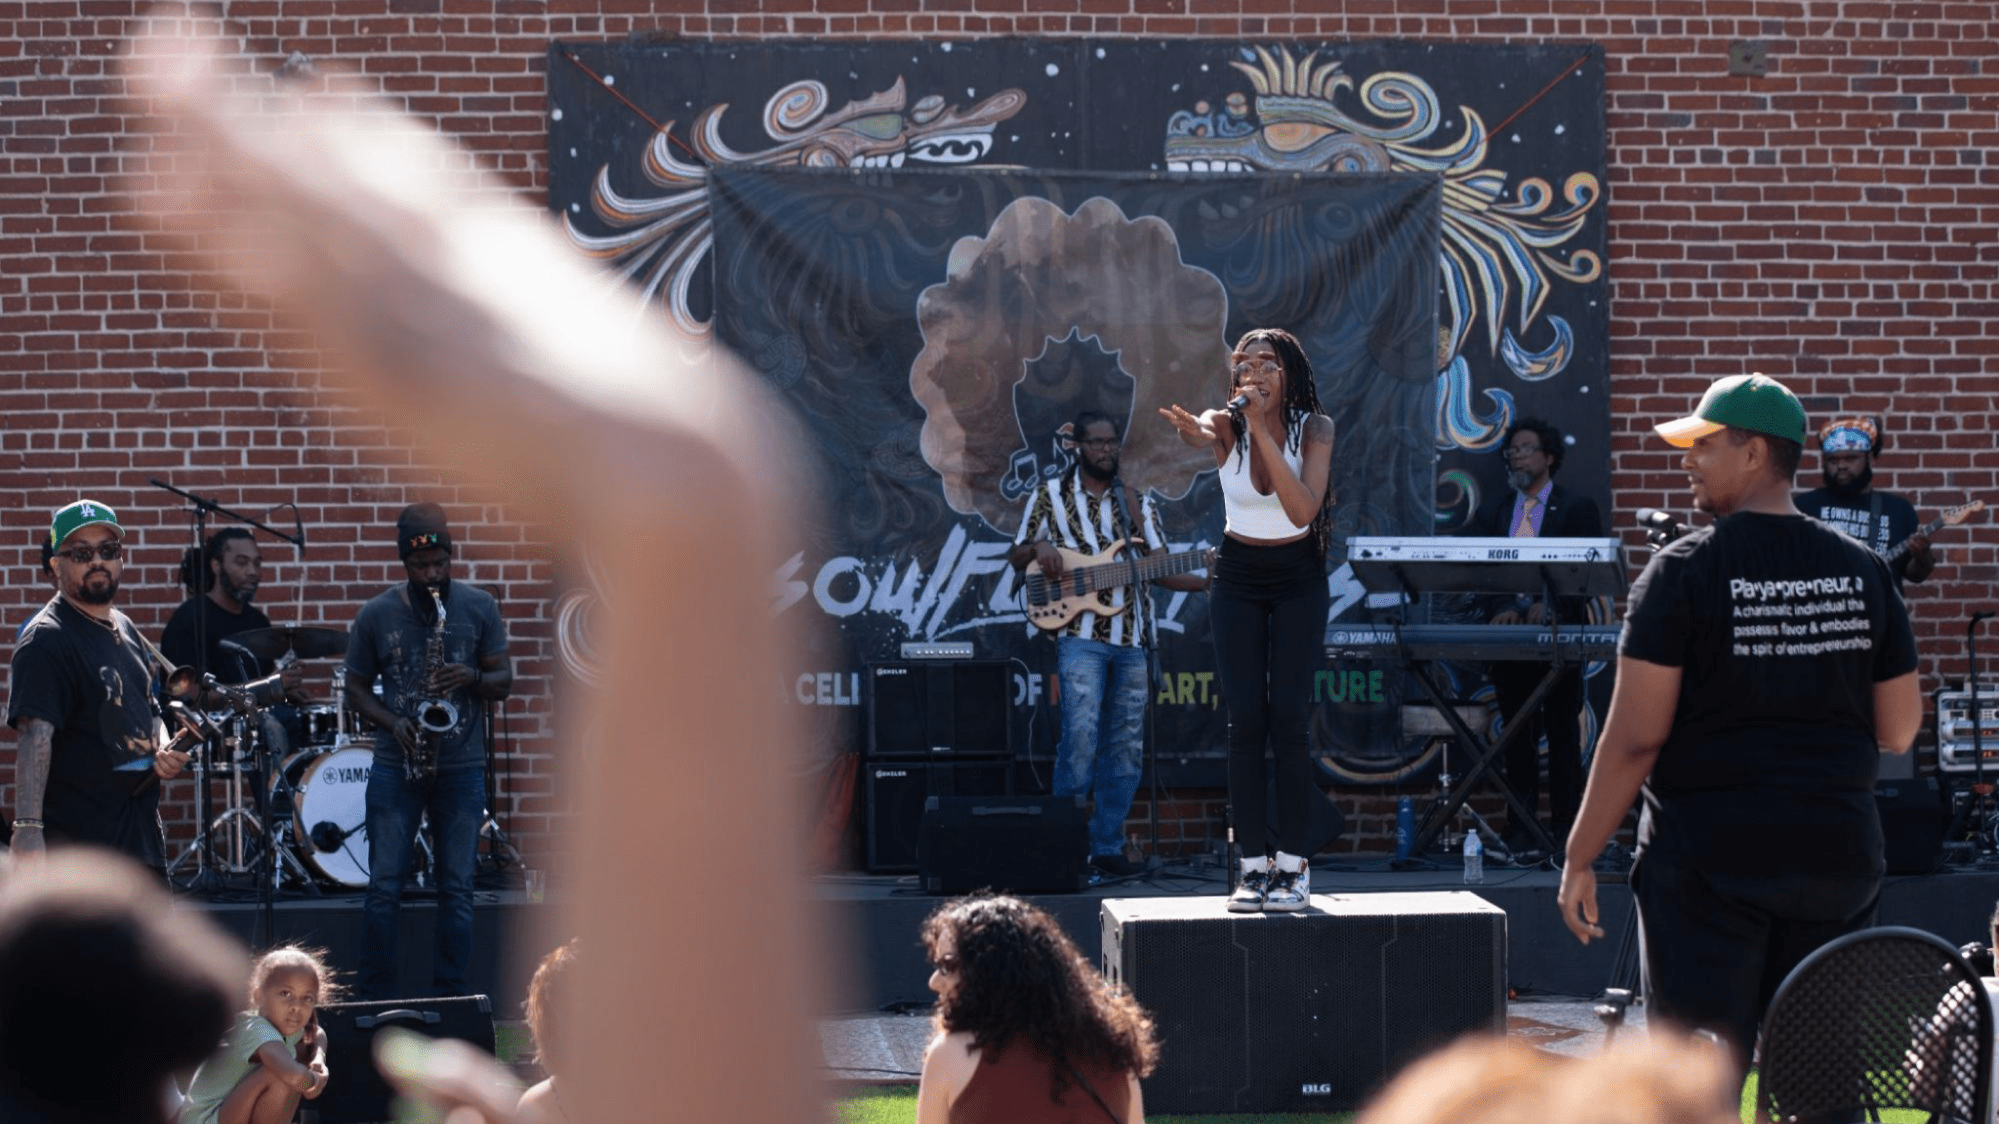 Musicians play for a family crowd at Soulful Sundays in L.A.